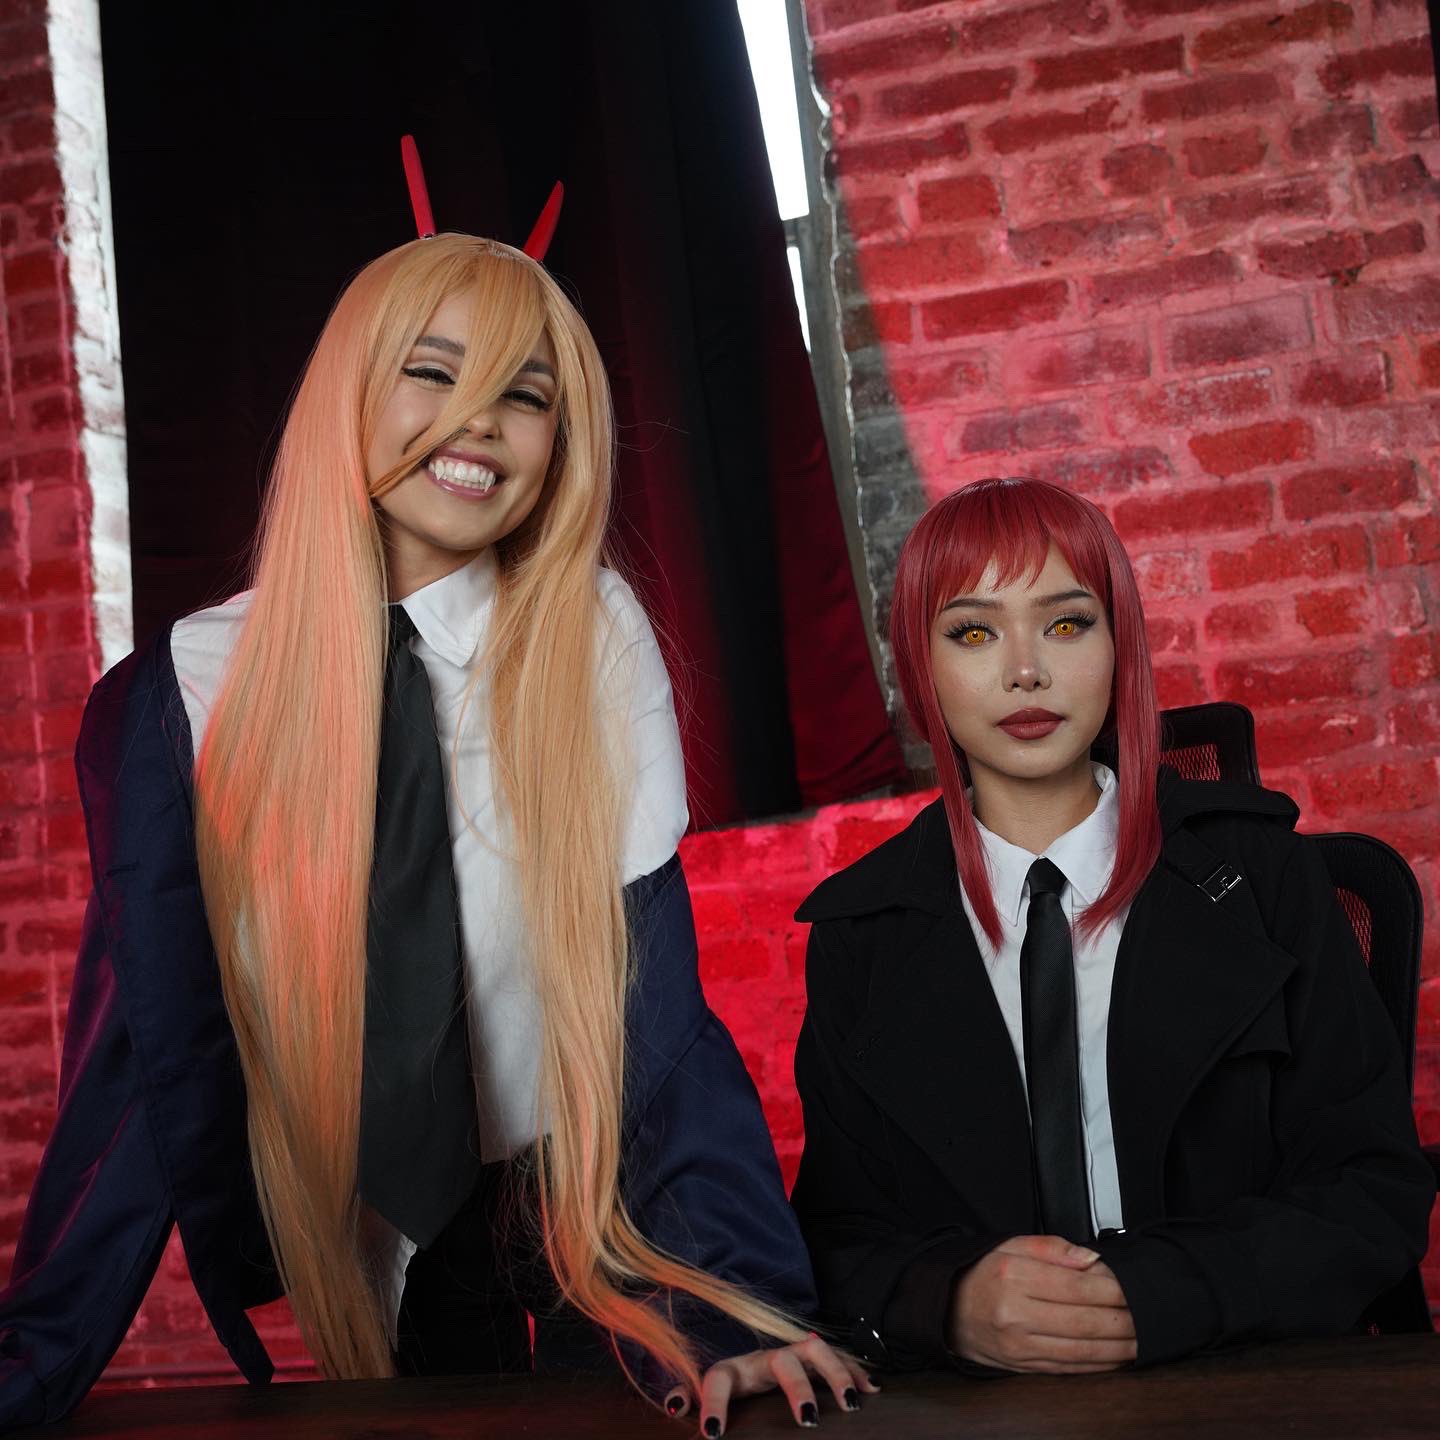 BARK BARK WOOF WOOF - Valkyrae and Bella Poarch Fans Act Like Dogs  After Seeing Their Chainsaw Man Cosplays - EssentiallySports